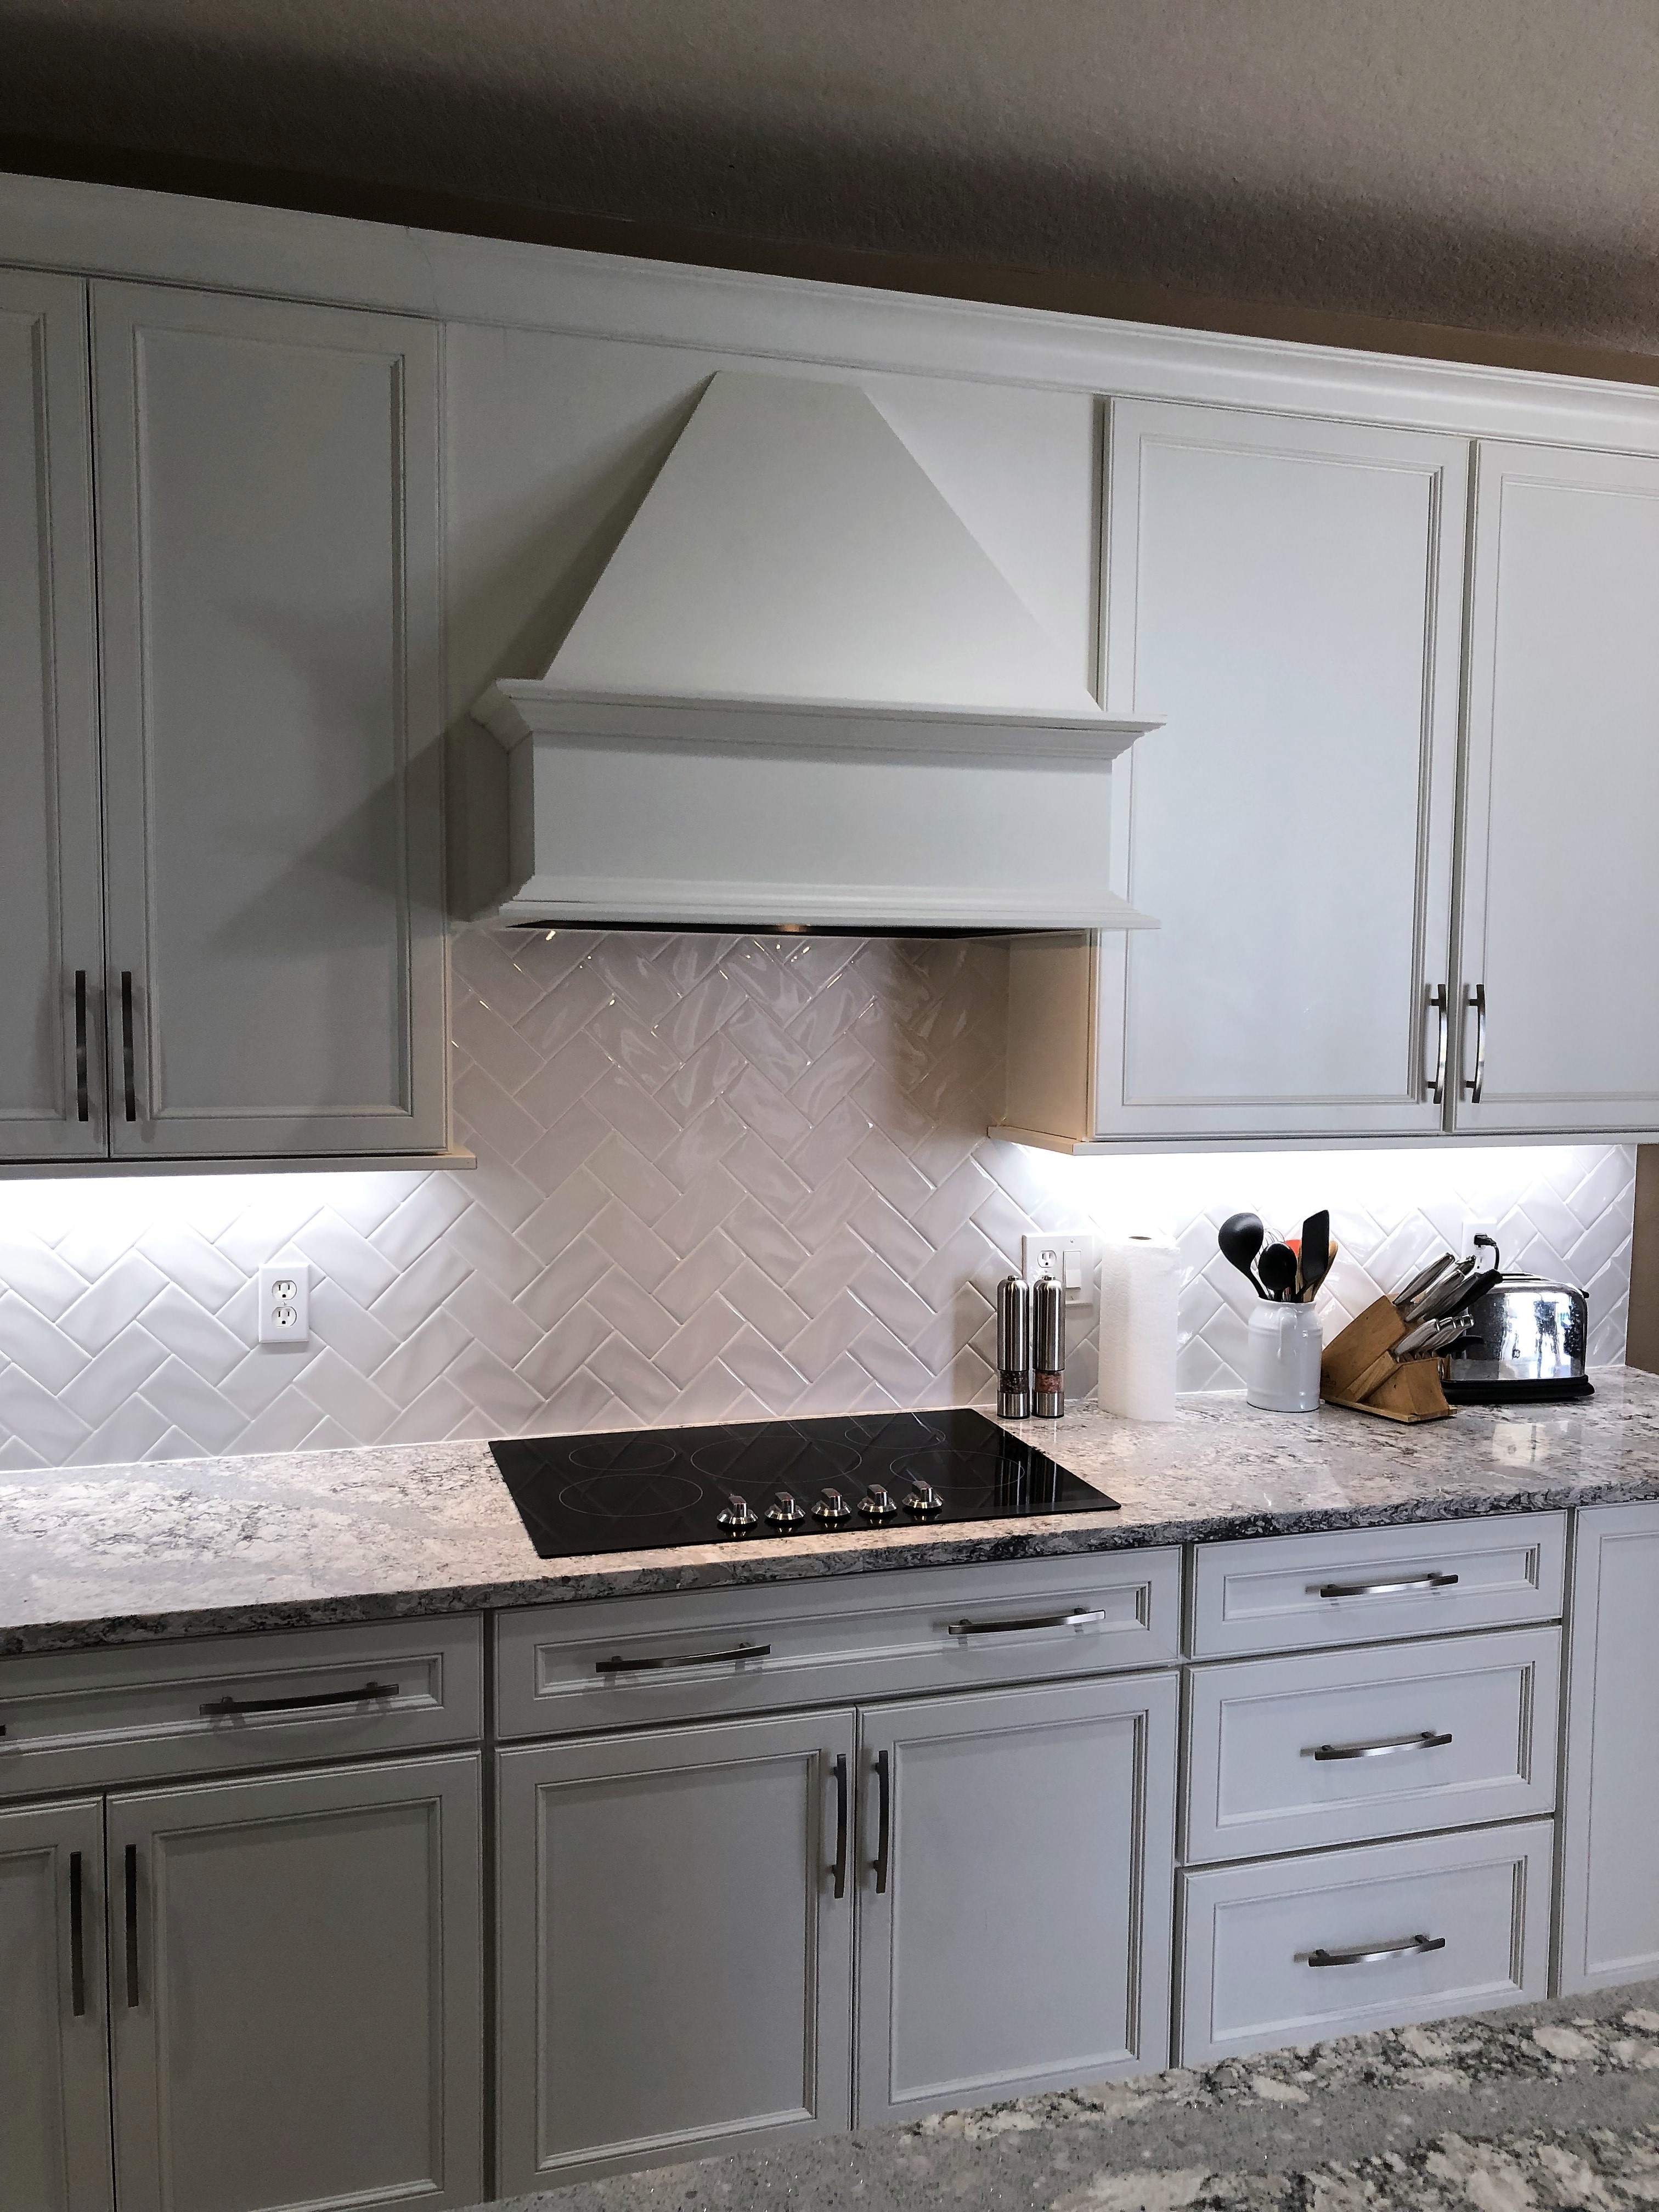 Featuring a classic hand scraped white subway tile set in a chevron pattern.